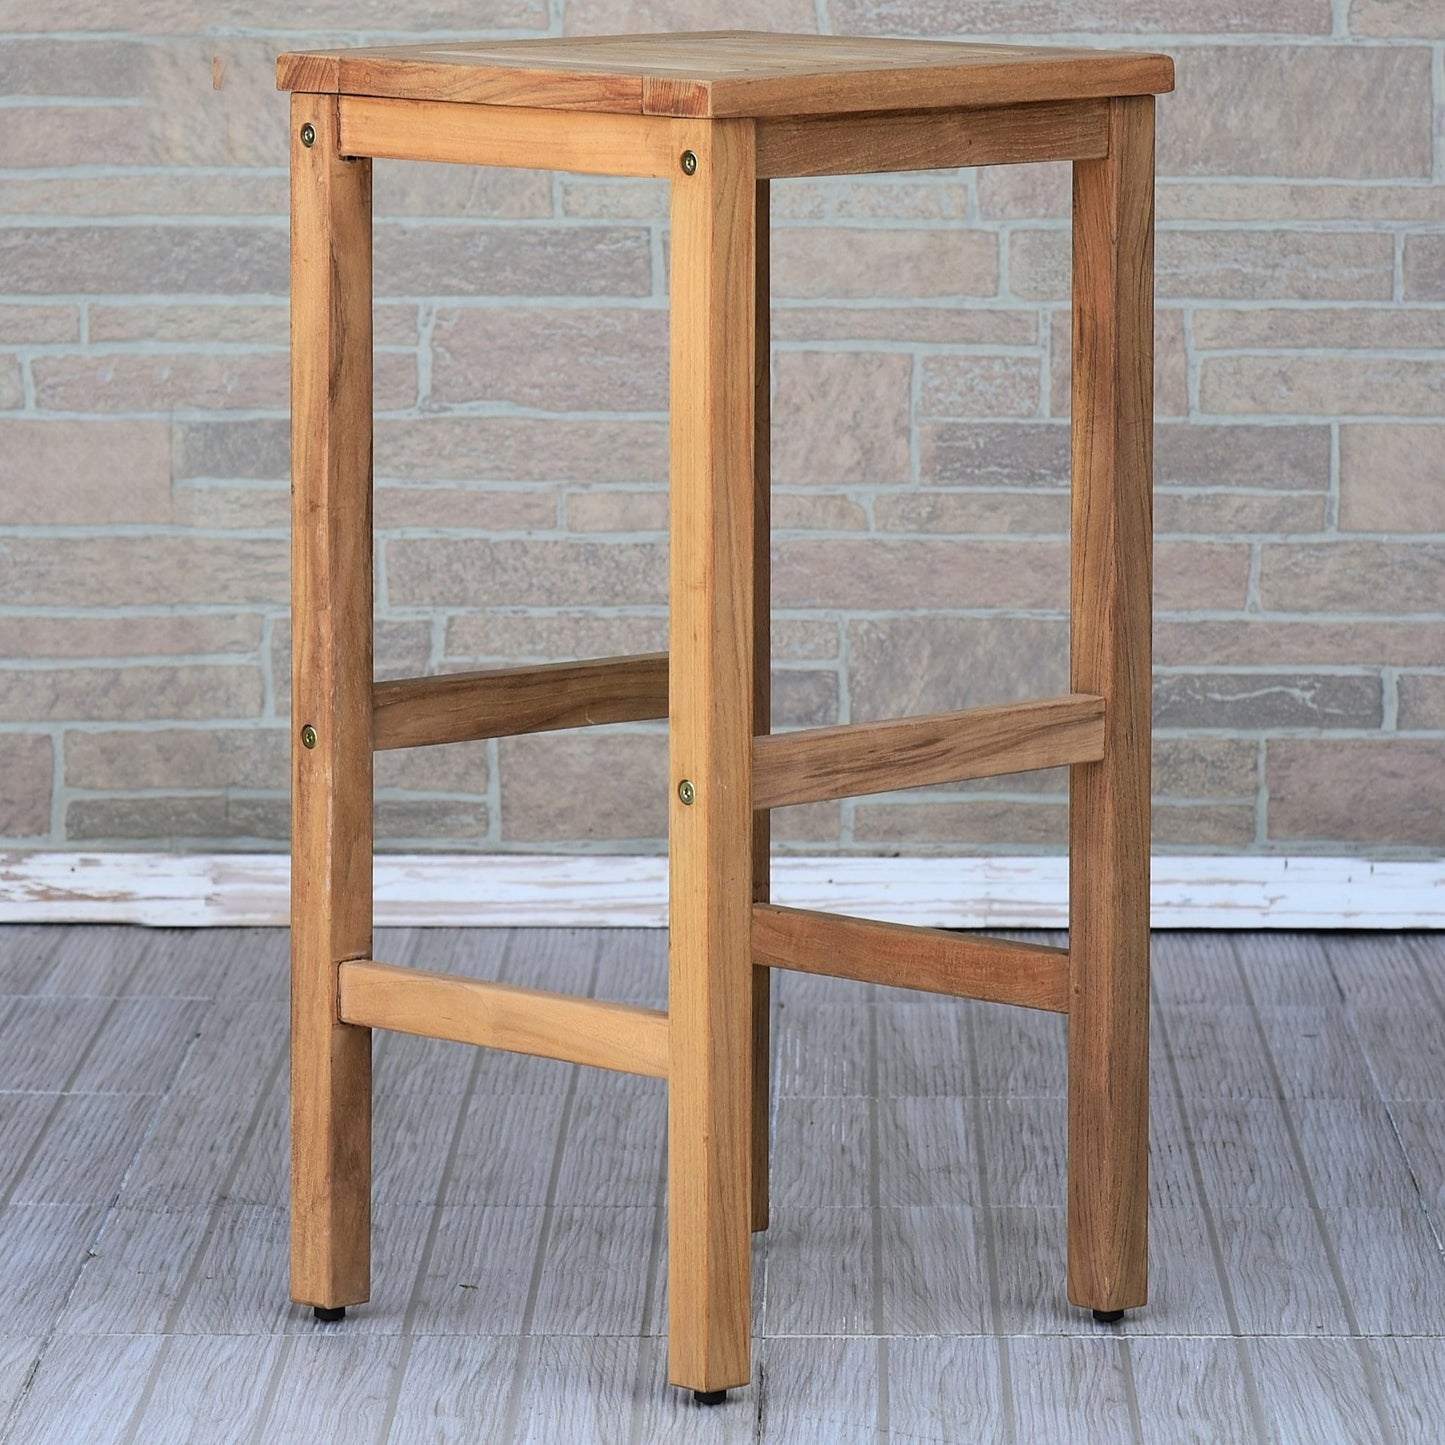 WAS $199 NOW $99 *BRAND NEW* Texas Stool Teak 100% FSC Certified Solid Wood